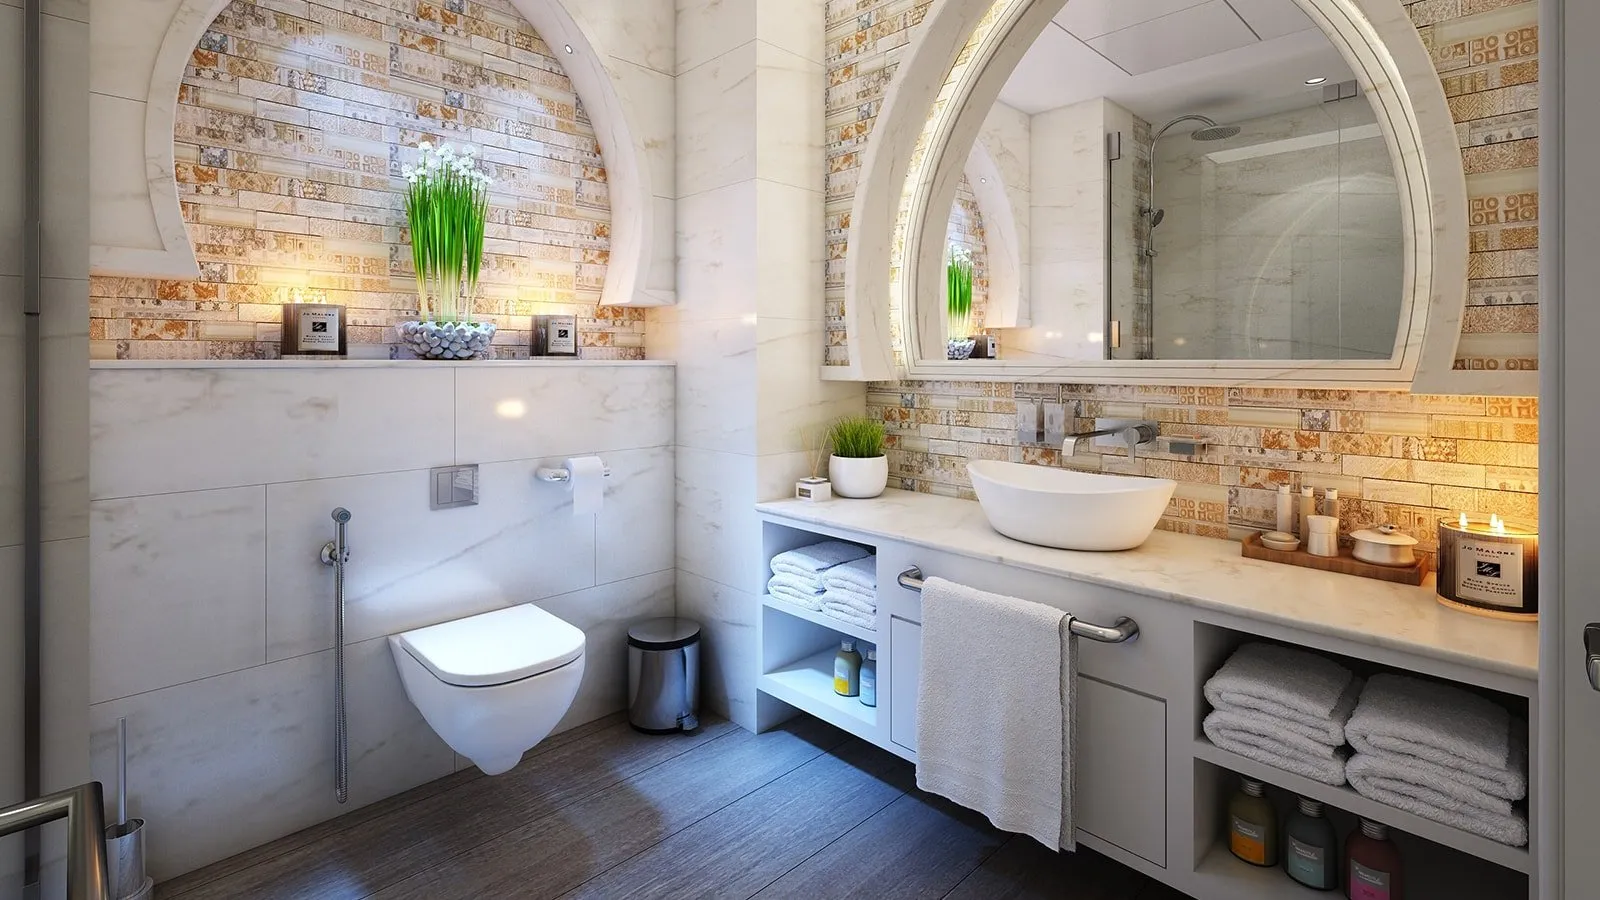 Contact for the best bathroom renovation in Dubai